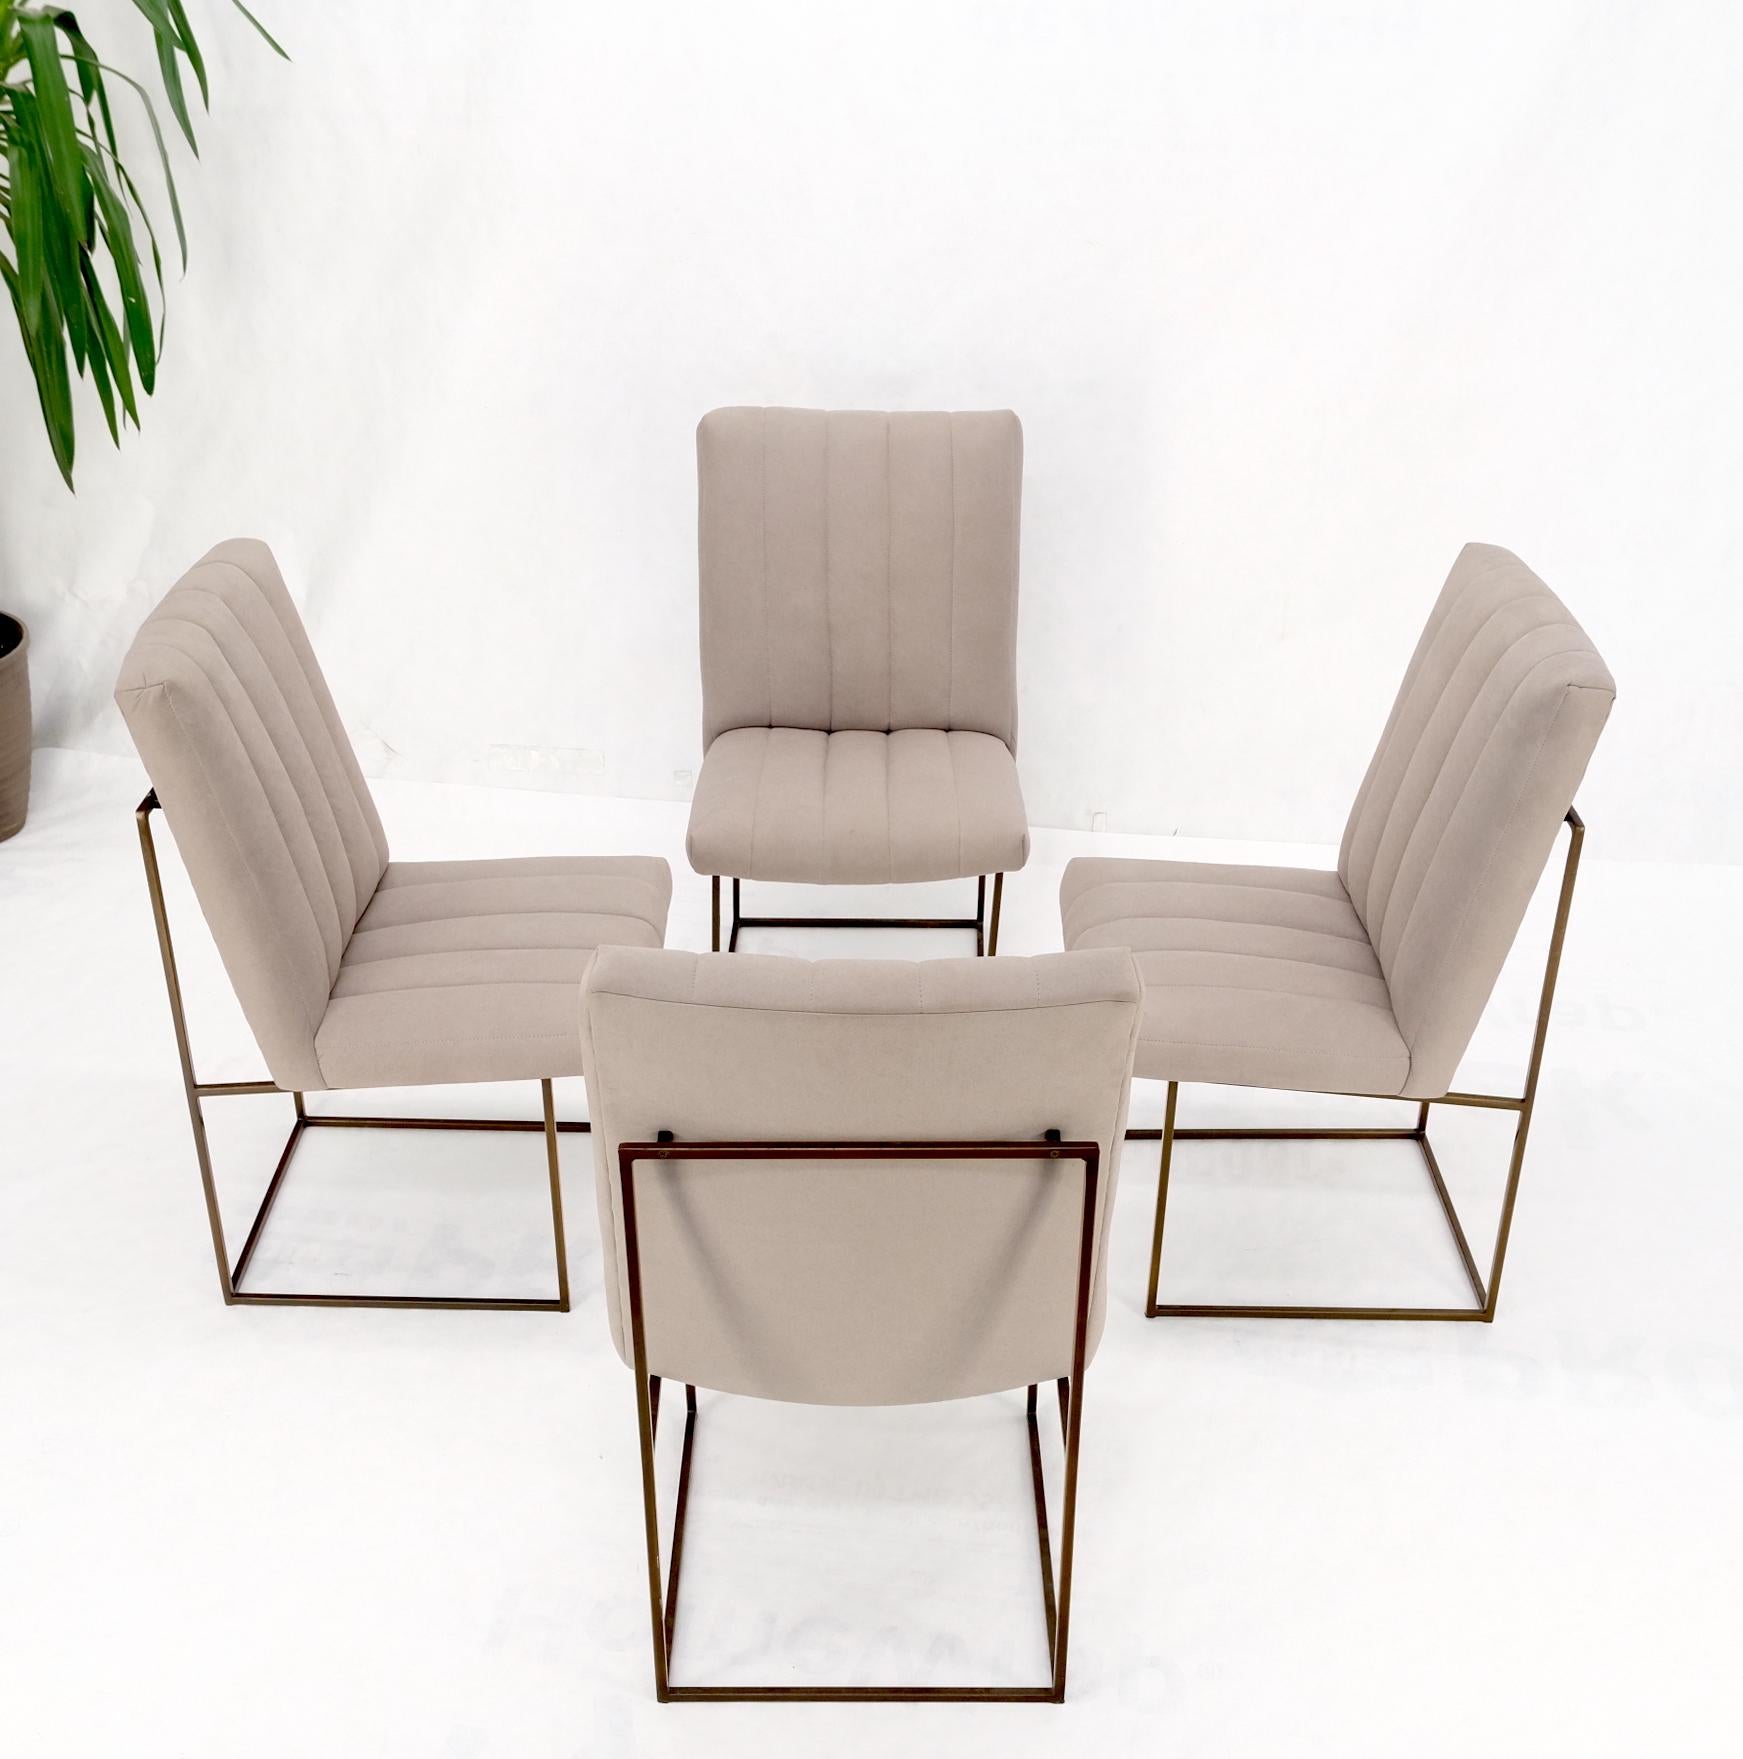 Set of 4 Milo Baughman Mid-Century Modern Dining Chairs New Alcantera Upholstery For Sale 4